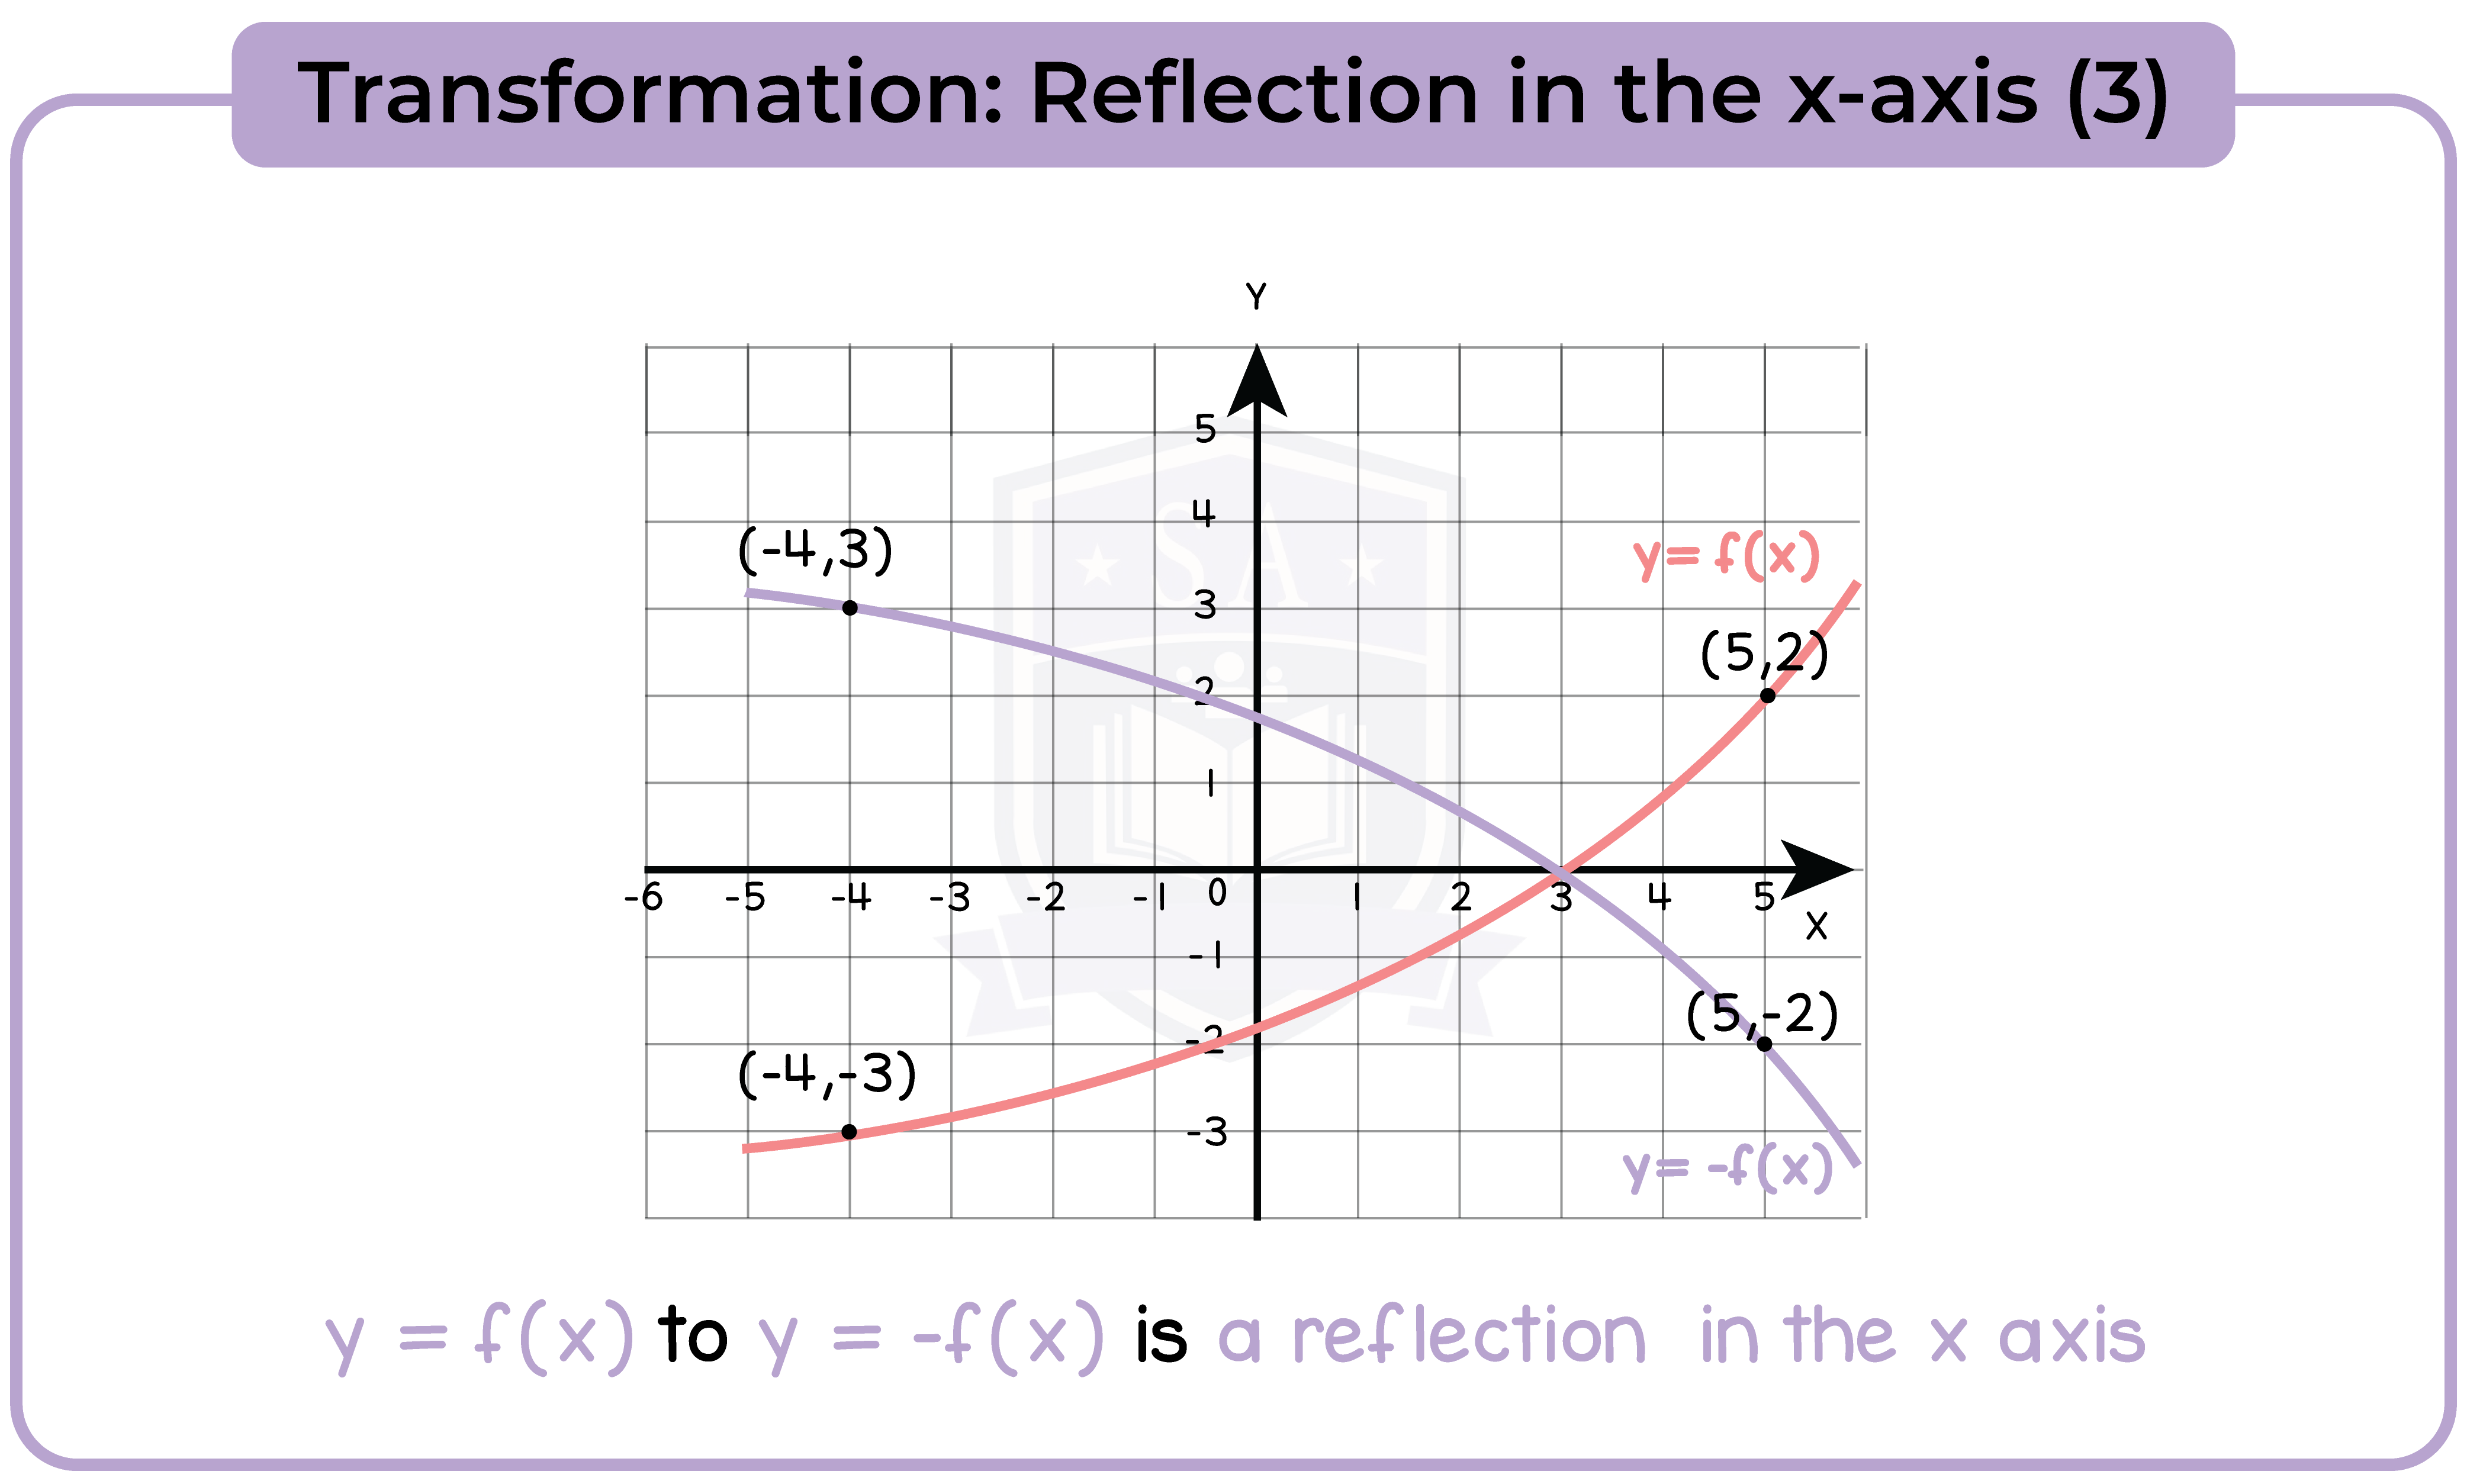 edexcel_igcse_mathematics a_topic 23_graphs_011_Transformation: Reflection in the x-axis (3)